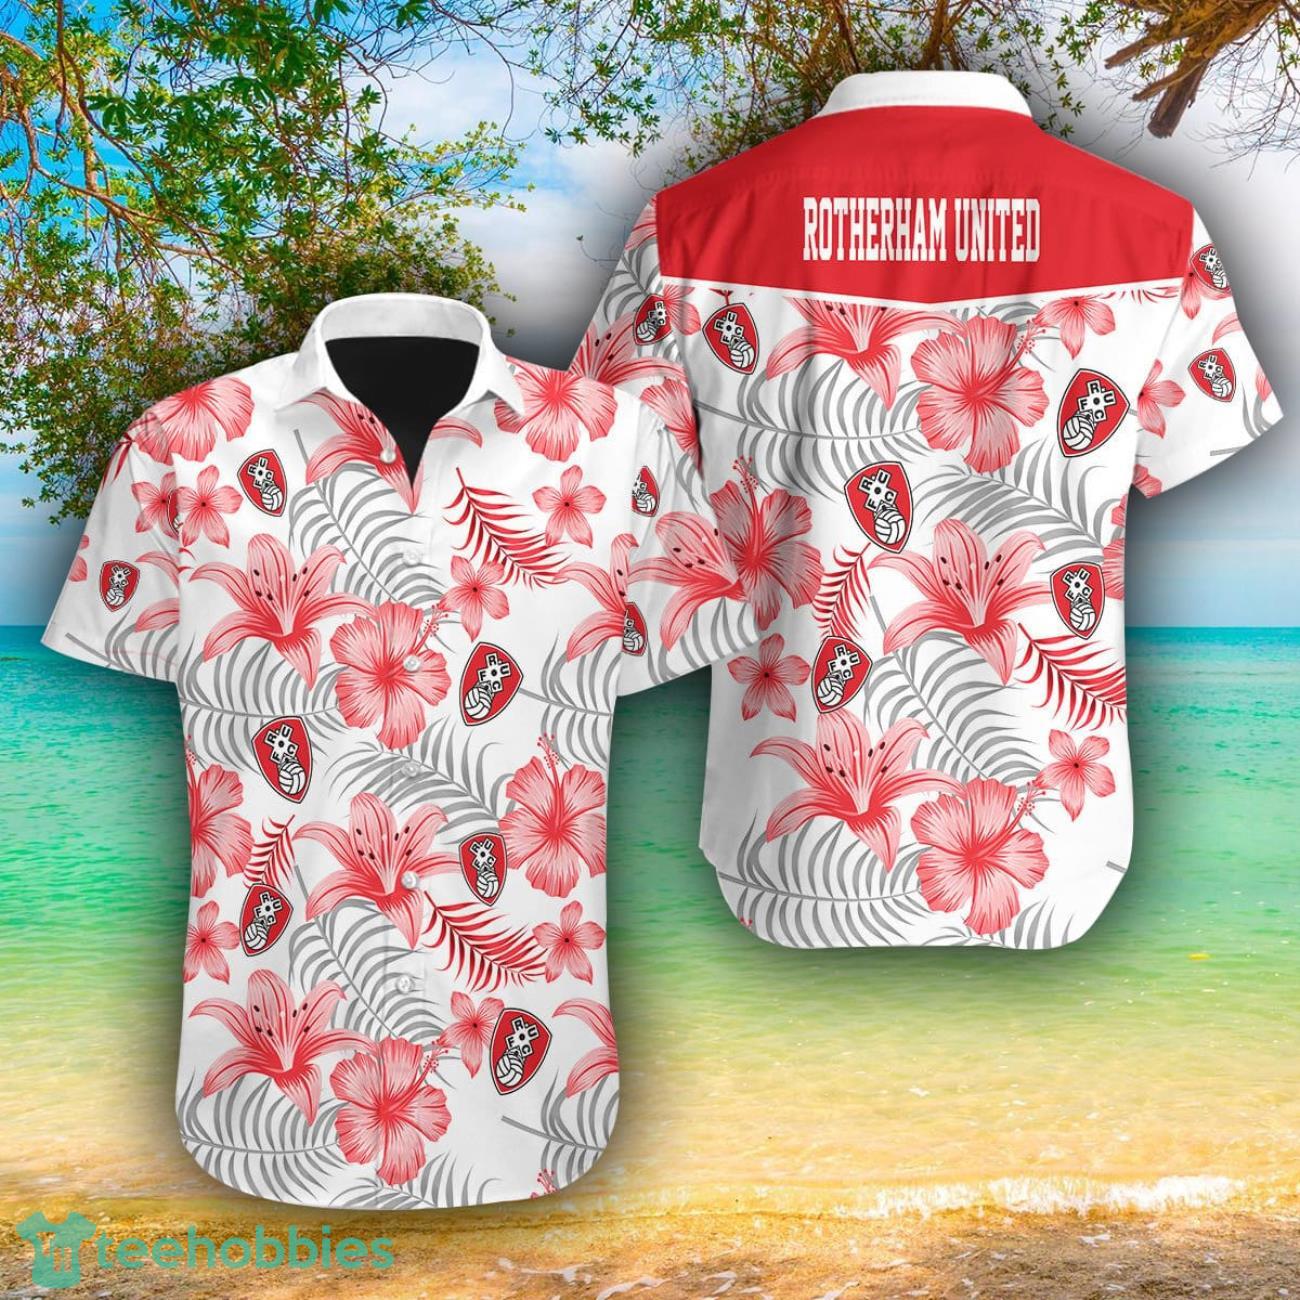 Rotherham United AOP Hawaiian Shirt For Men And Women Summer Gift Product Photo 1